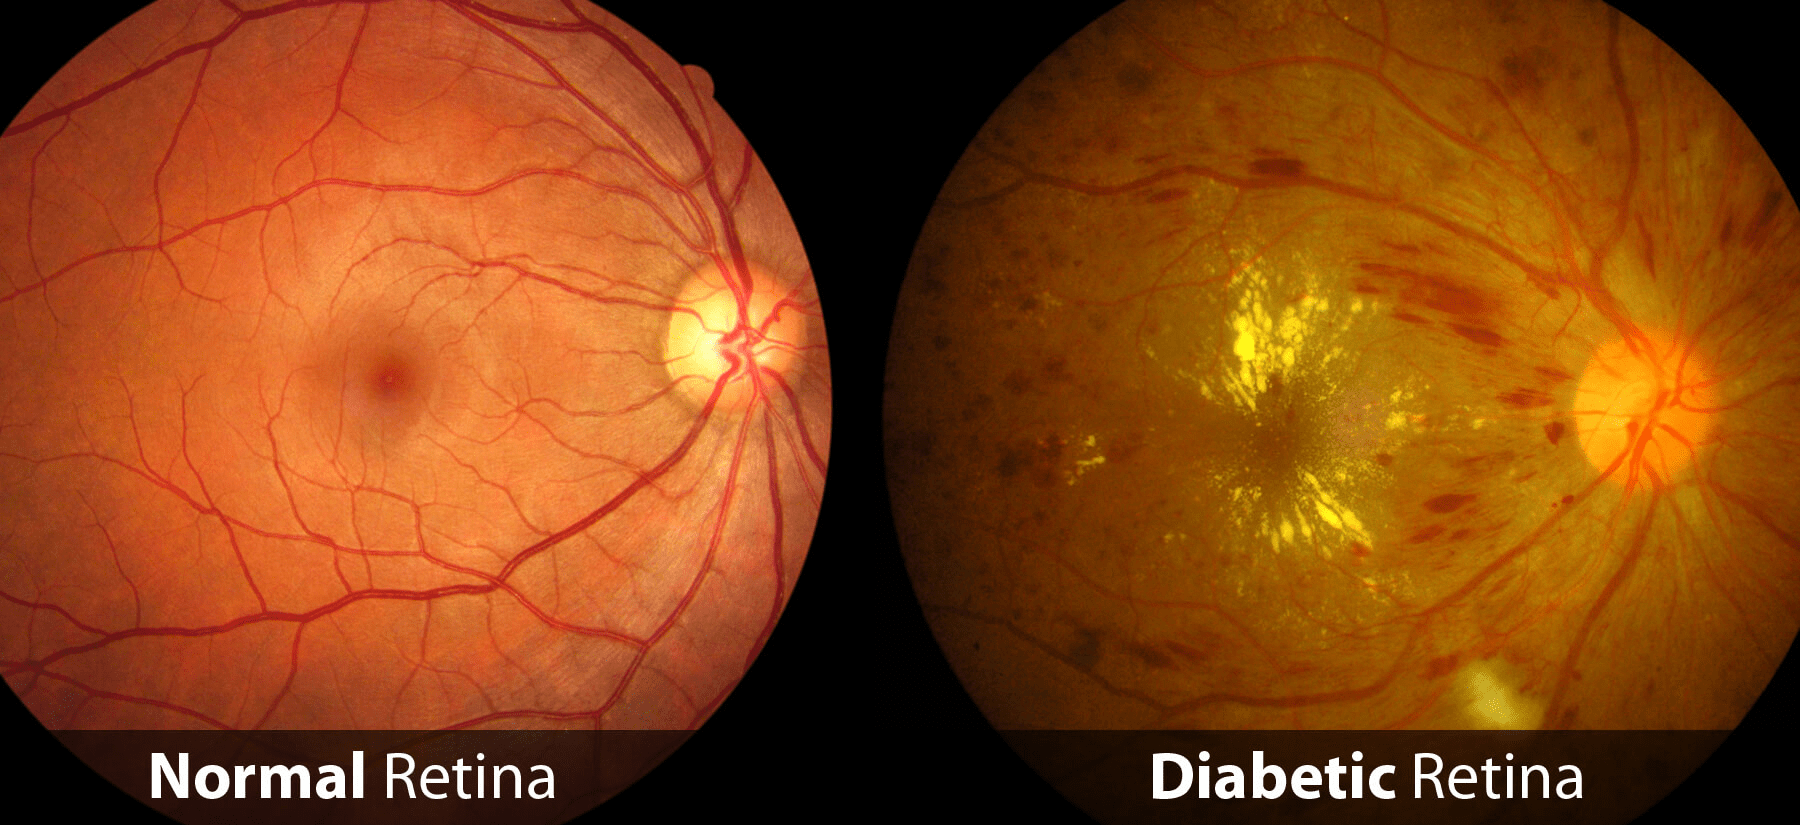 prevent this diabetes complication checked by the Best eye doctor near me